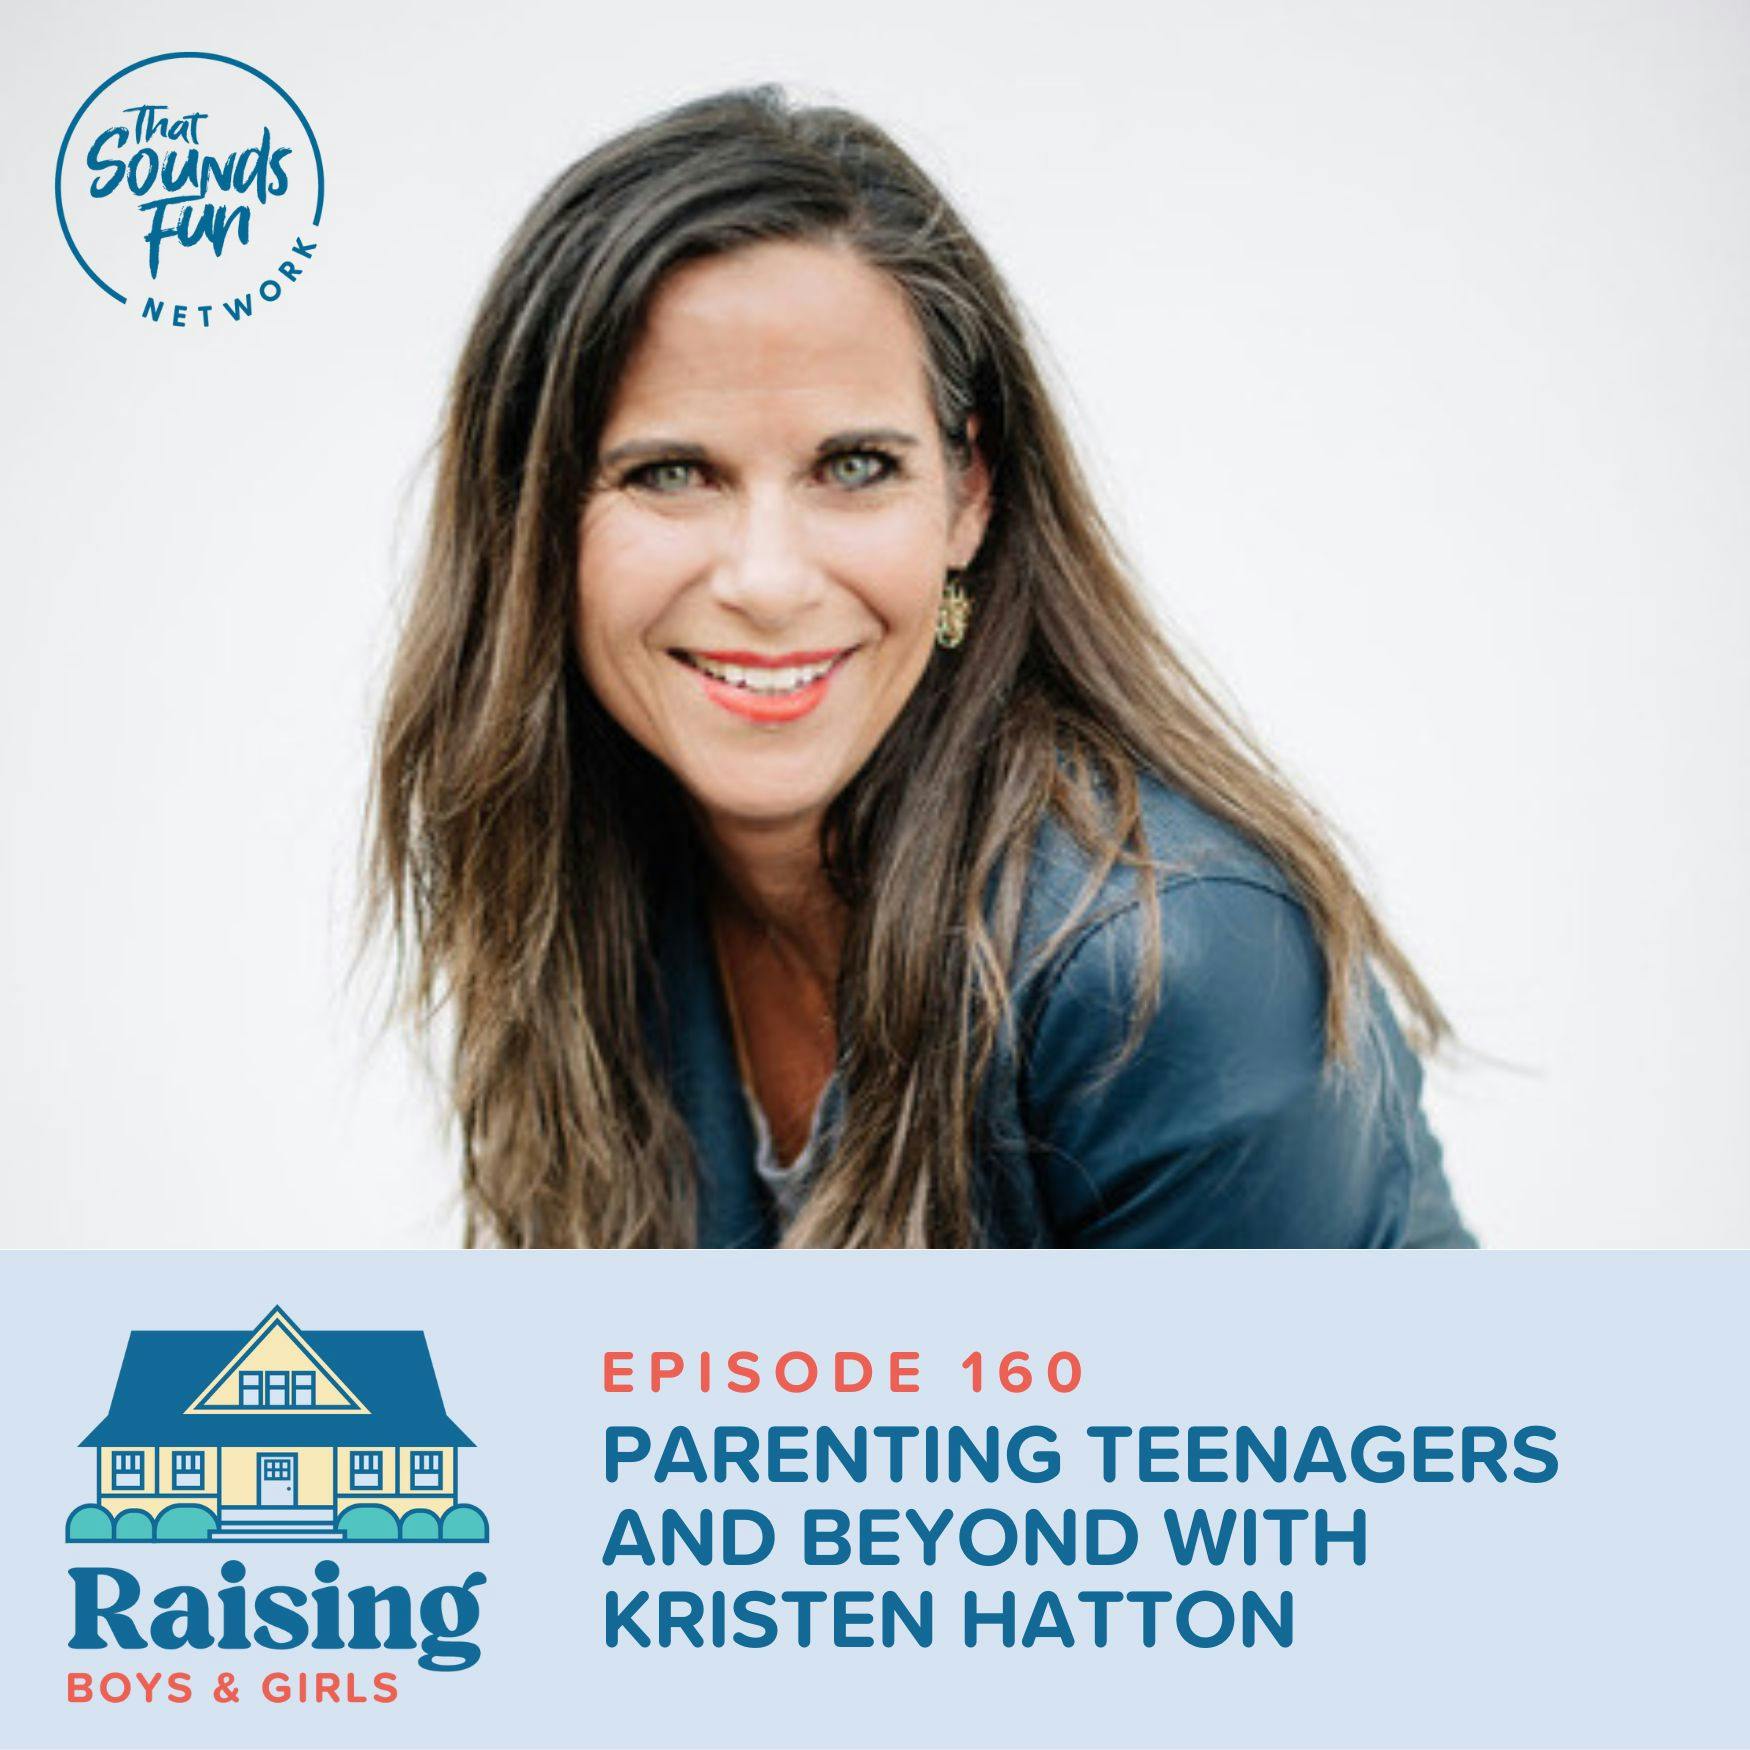 Episode 160: Parenting Teenagers and Beyond with Kristen Hatton